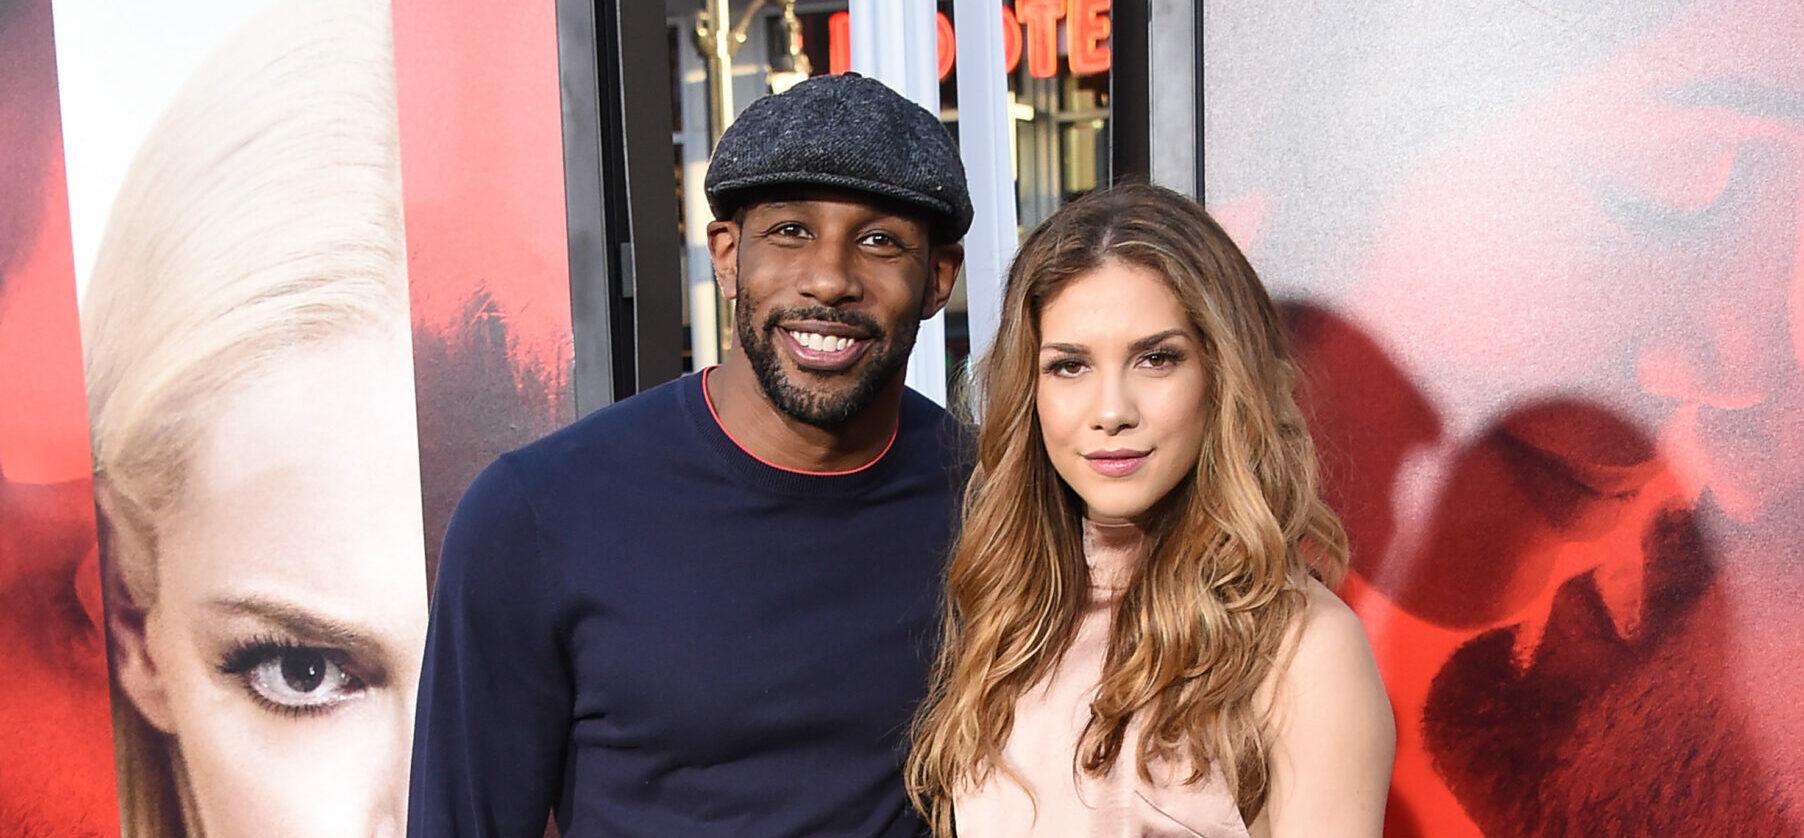 Allison Holker Boss Opens Up About Husband, tWitch’s Suicide: ‘No One Had Any Inkling He Was Low’